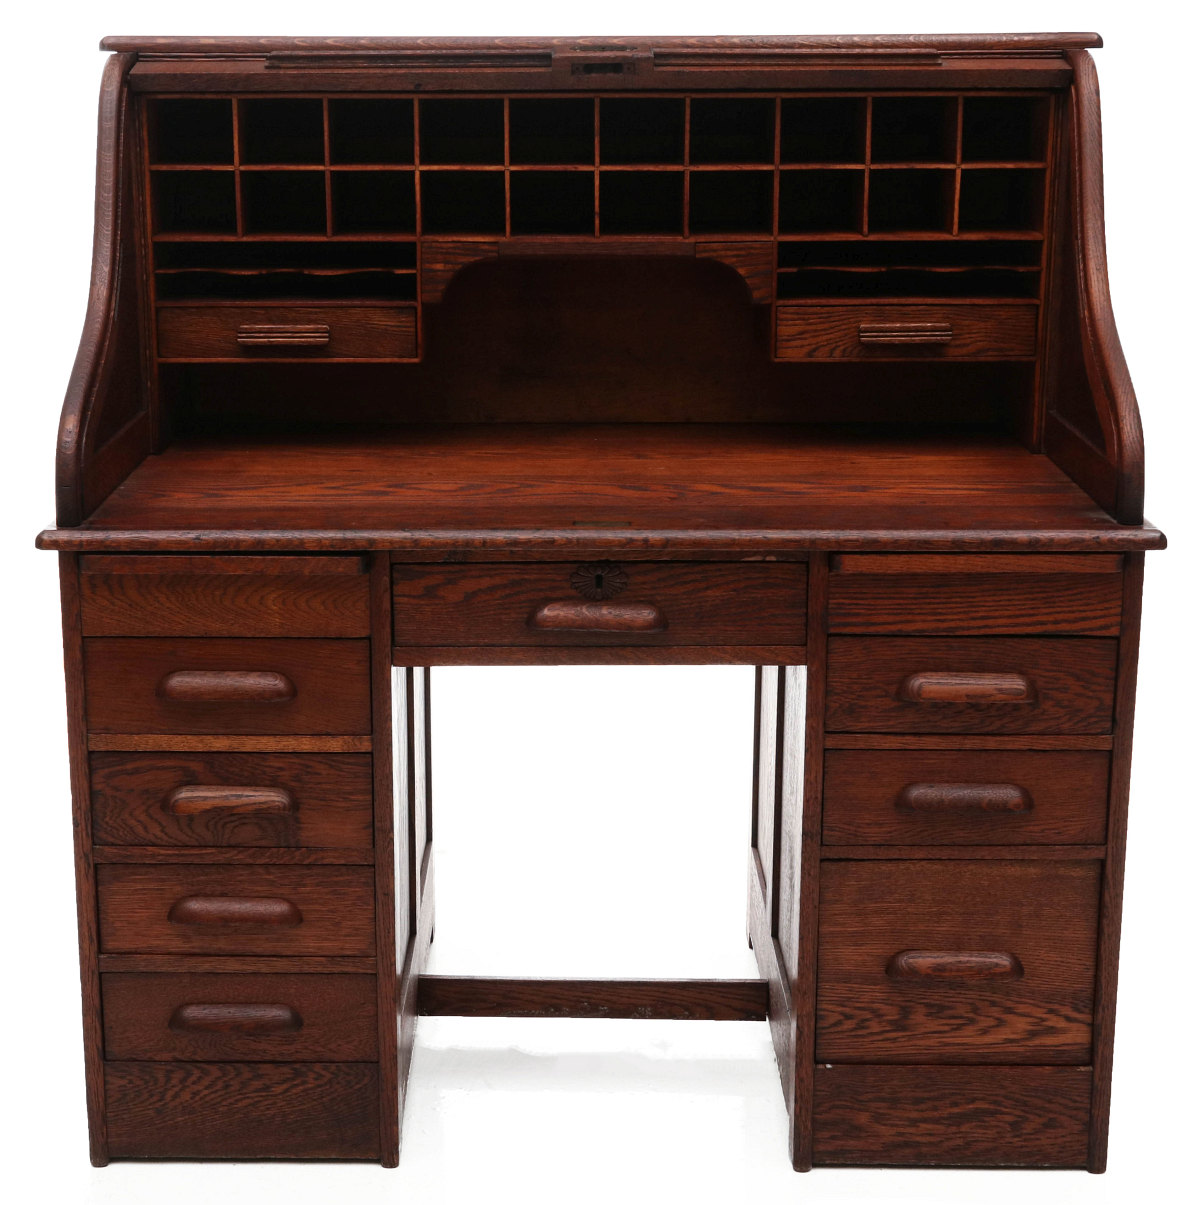 A NICE SMALLER 'S' ROLL DESK WITH ROLL FRONT TOP